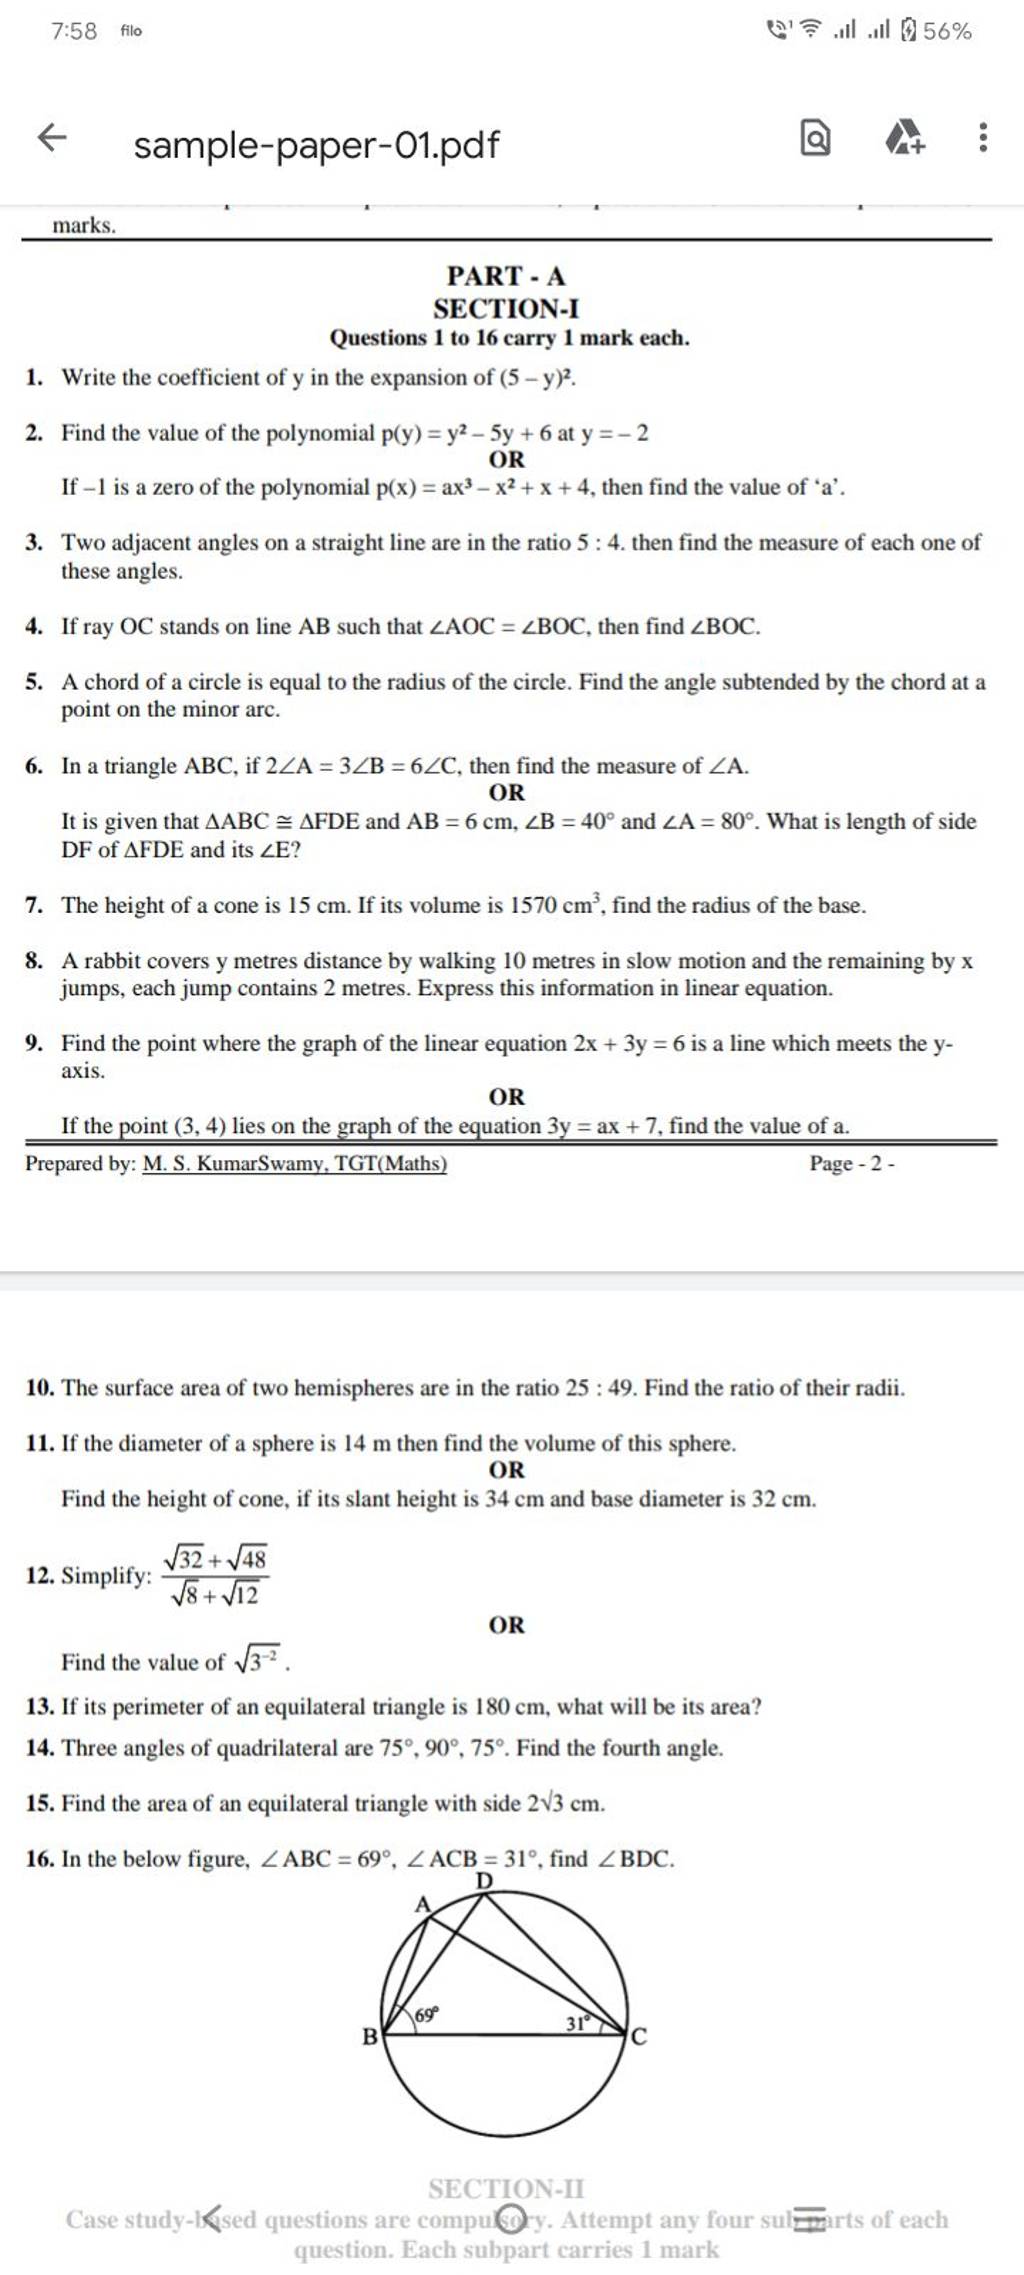 ← sample-paper-01.pdf
Q : :
marks.
PART - A
SECTION-I
Questions 1 to 1